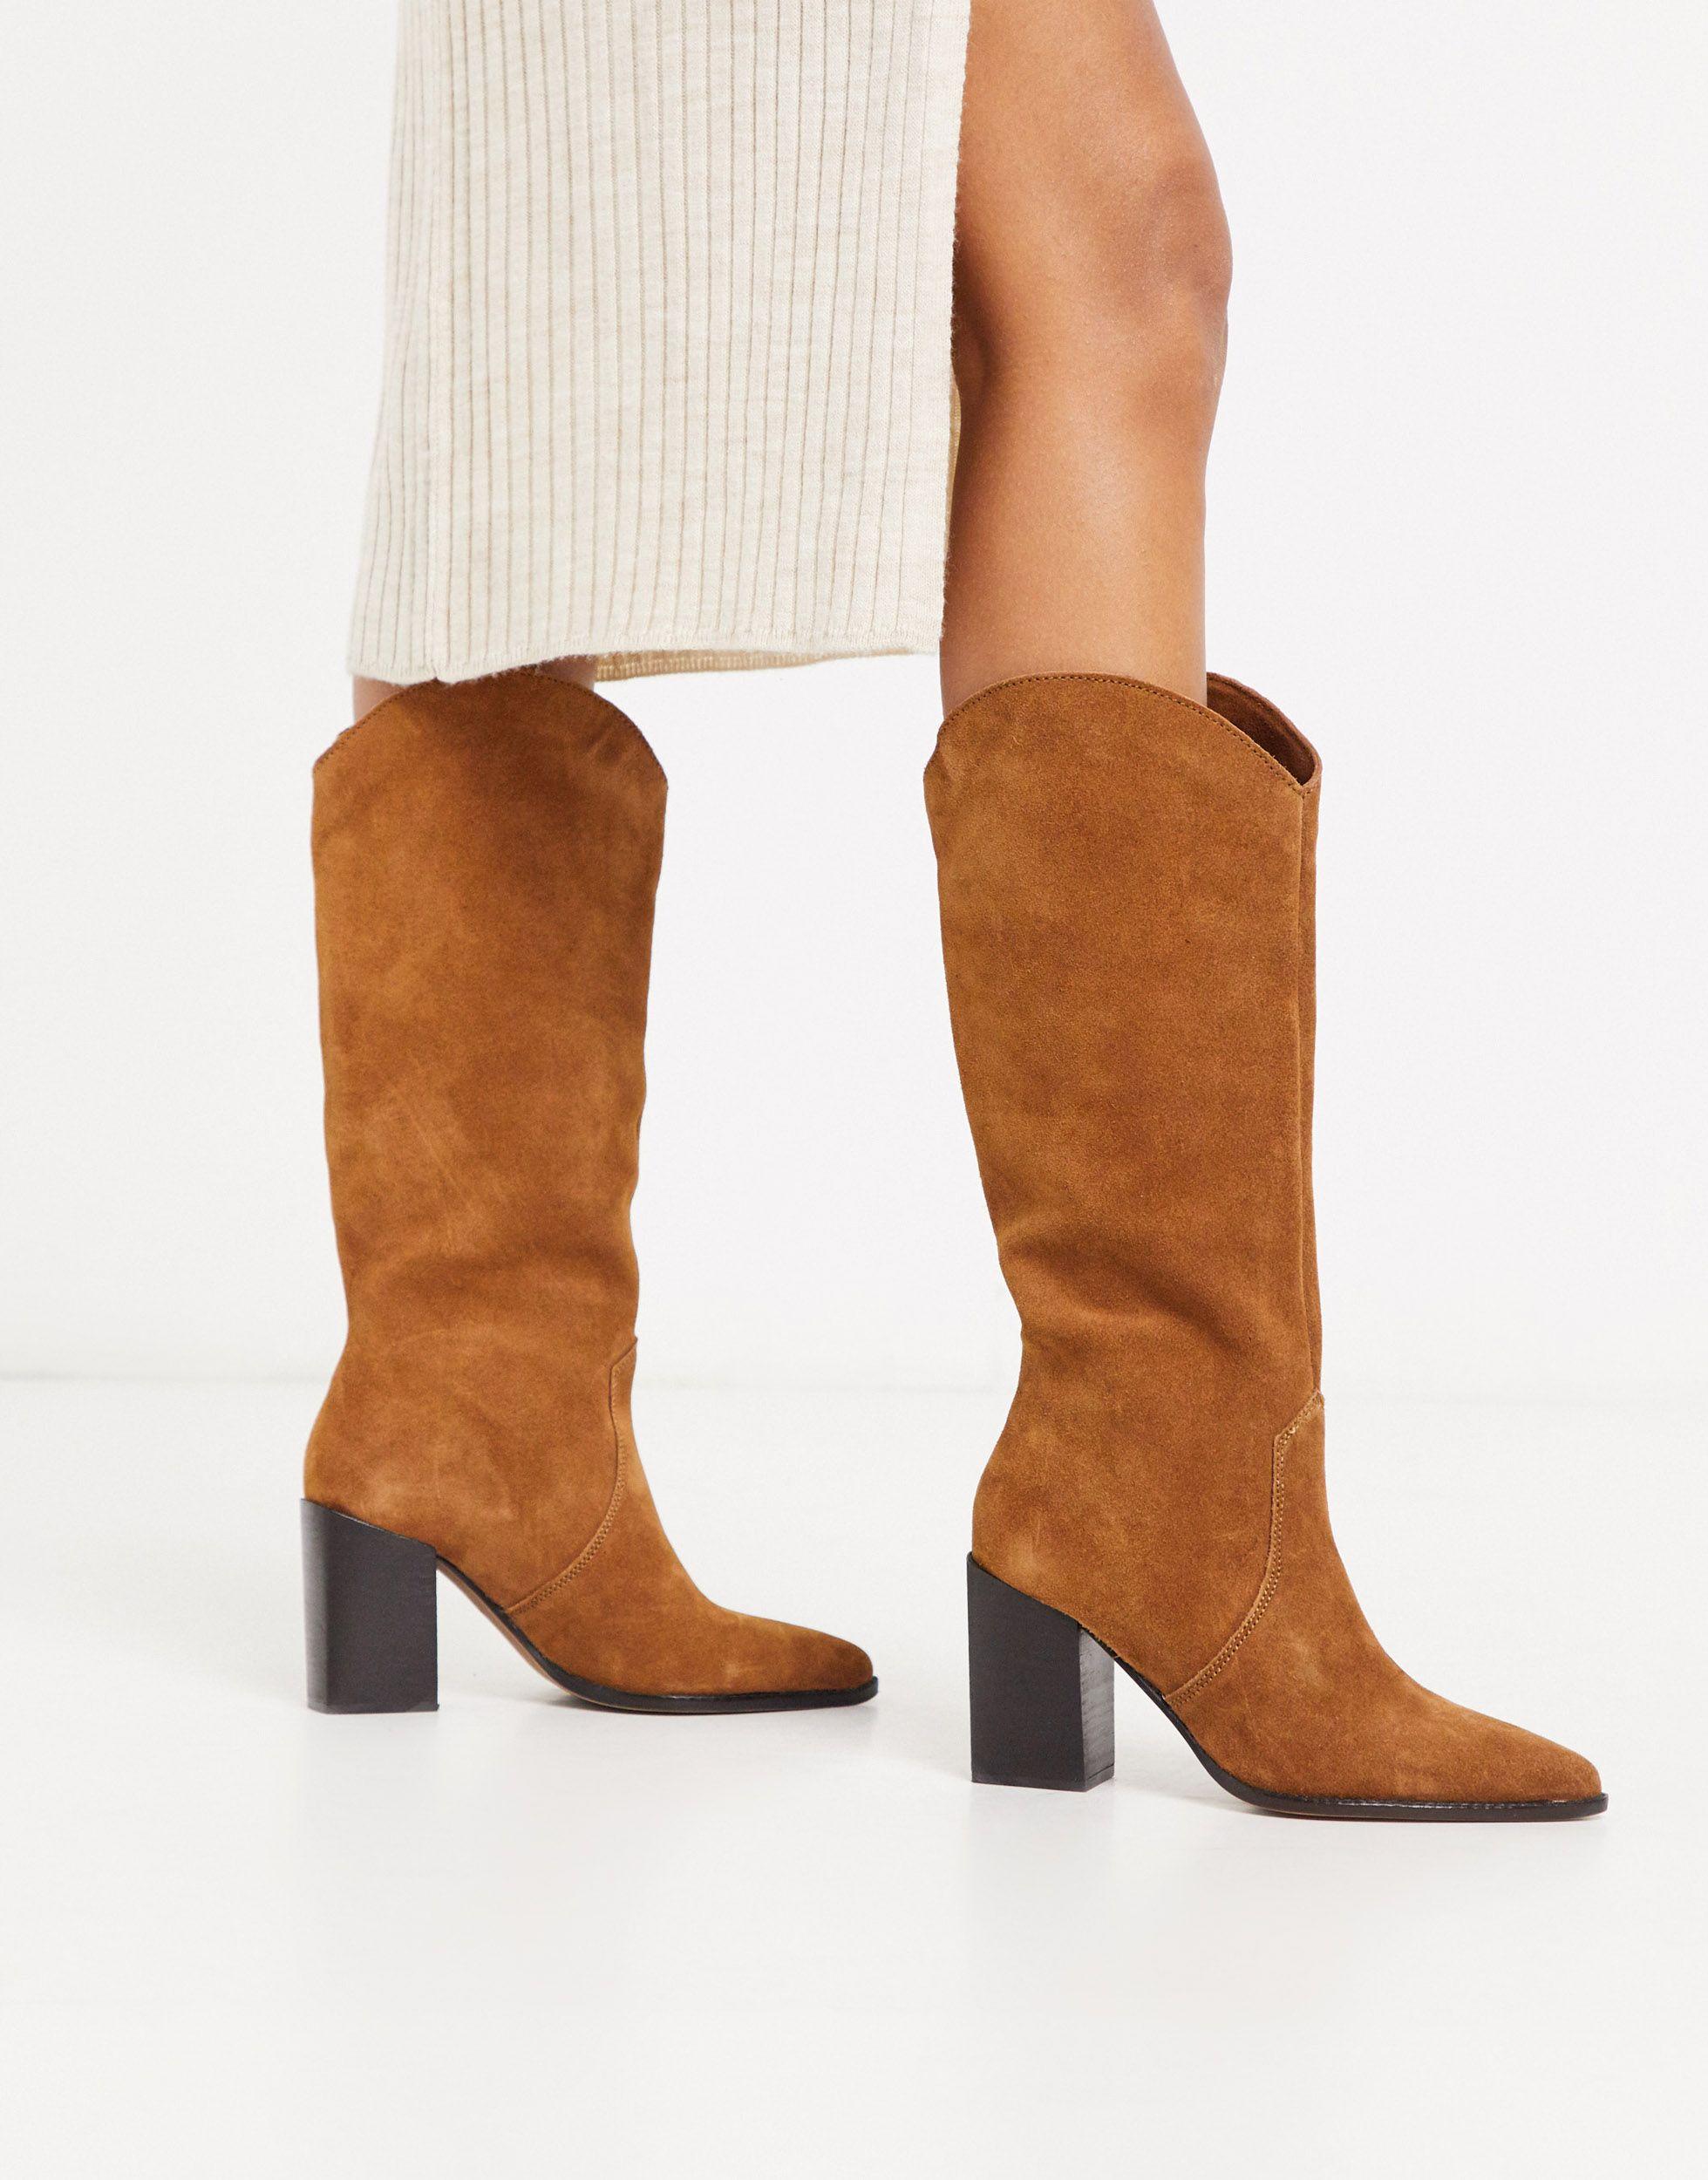 Mango Suede Slouchy Hi Leg Boots in Brown | Lyst